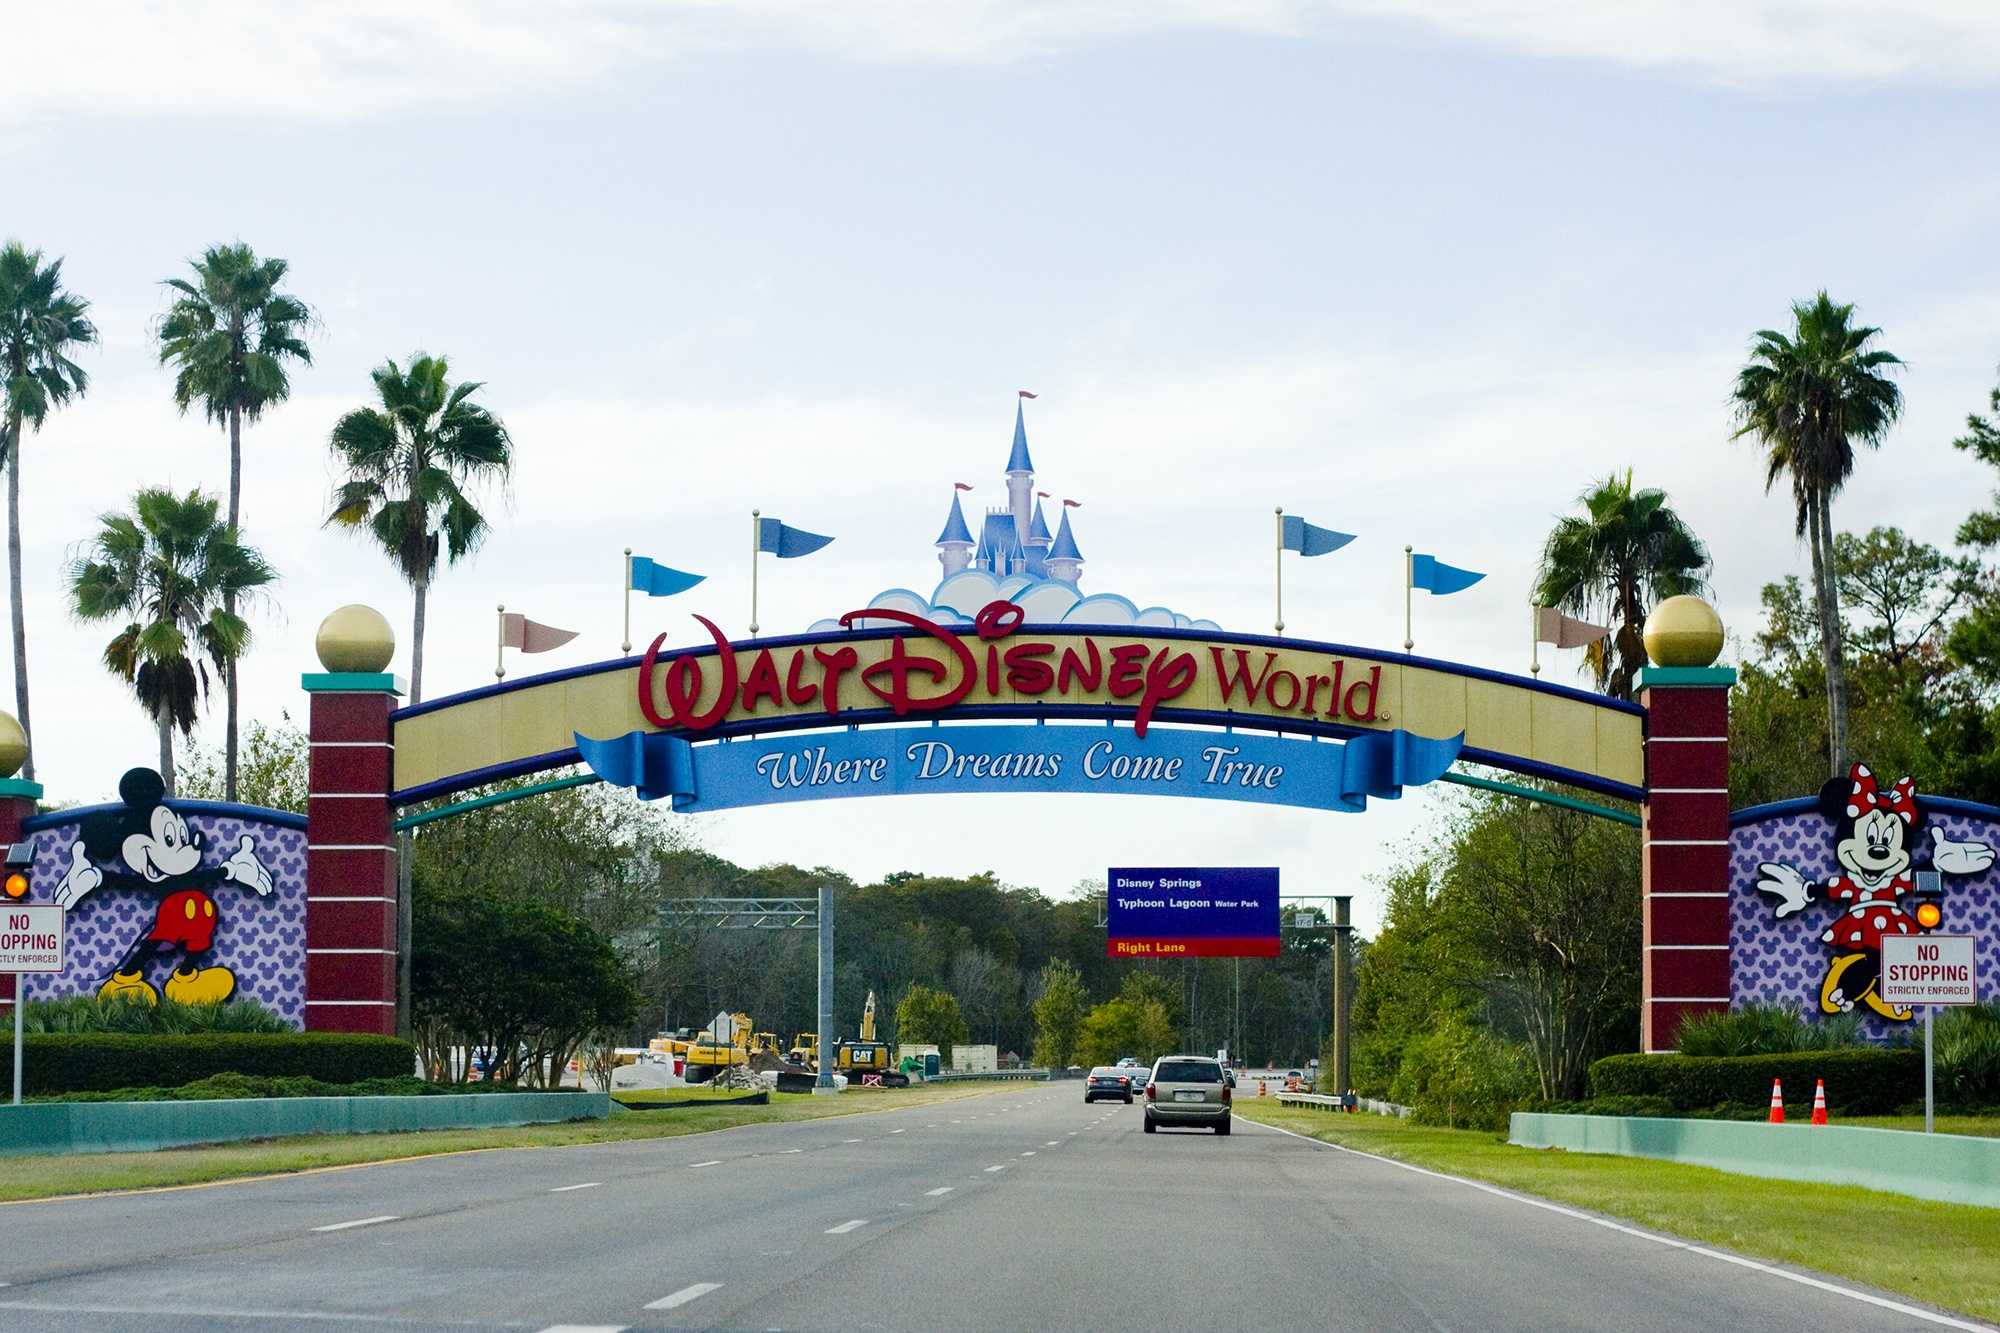 Disney announces layoffs in parks and resorts division